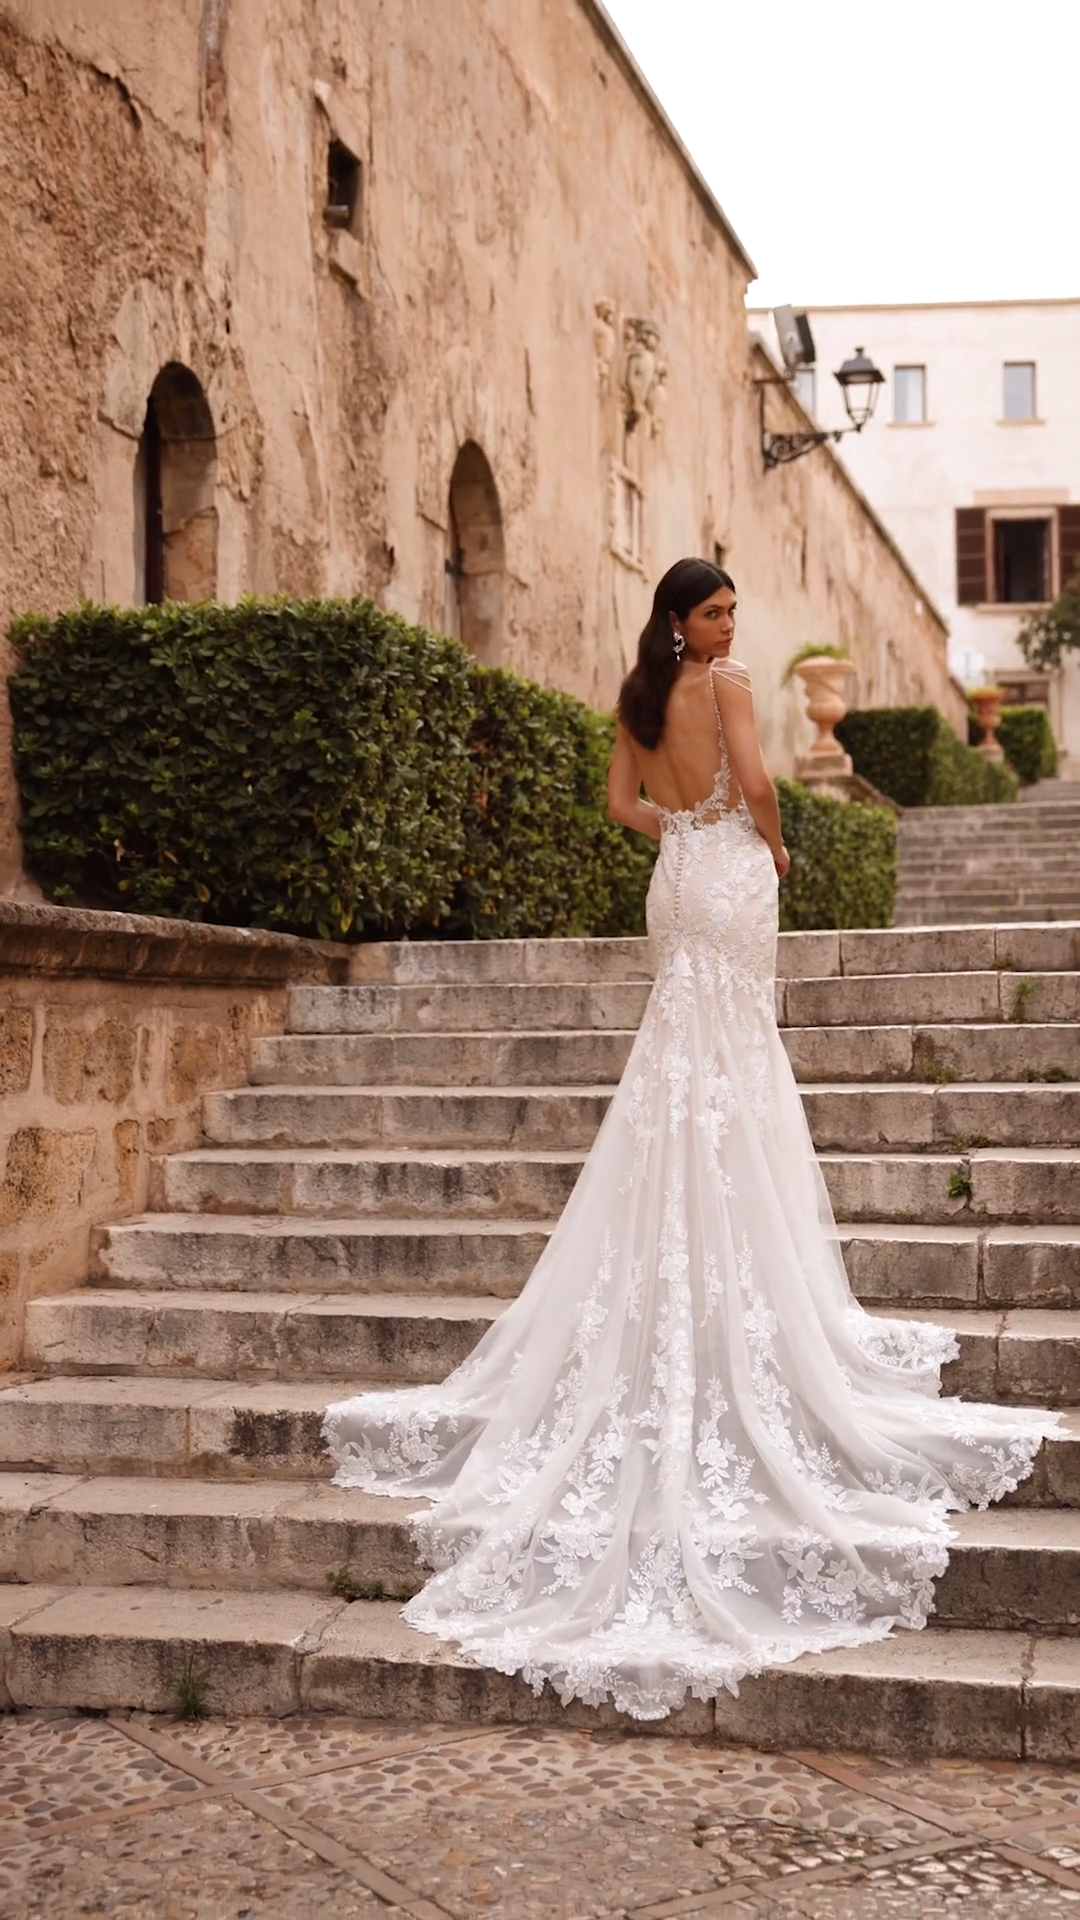 Bride Walking Up Stairs in Fitted Wedding Dress With Lace Shaped Train and Low Back